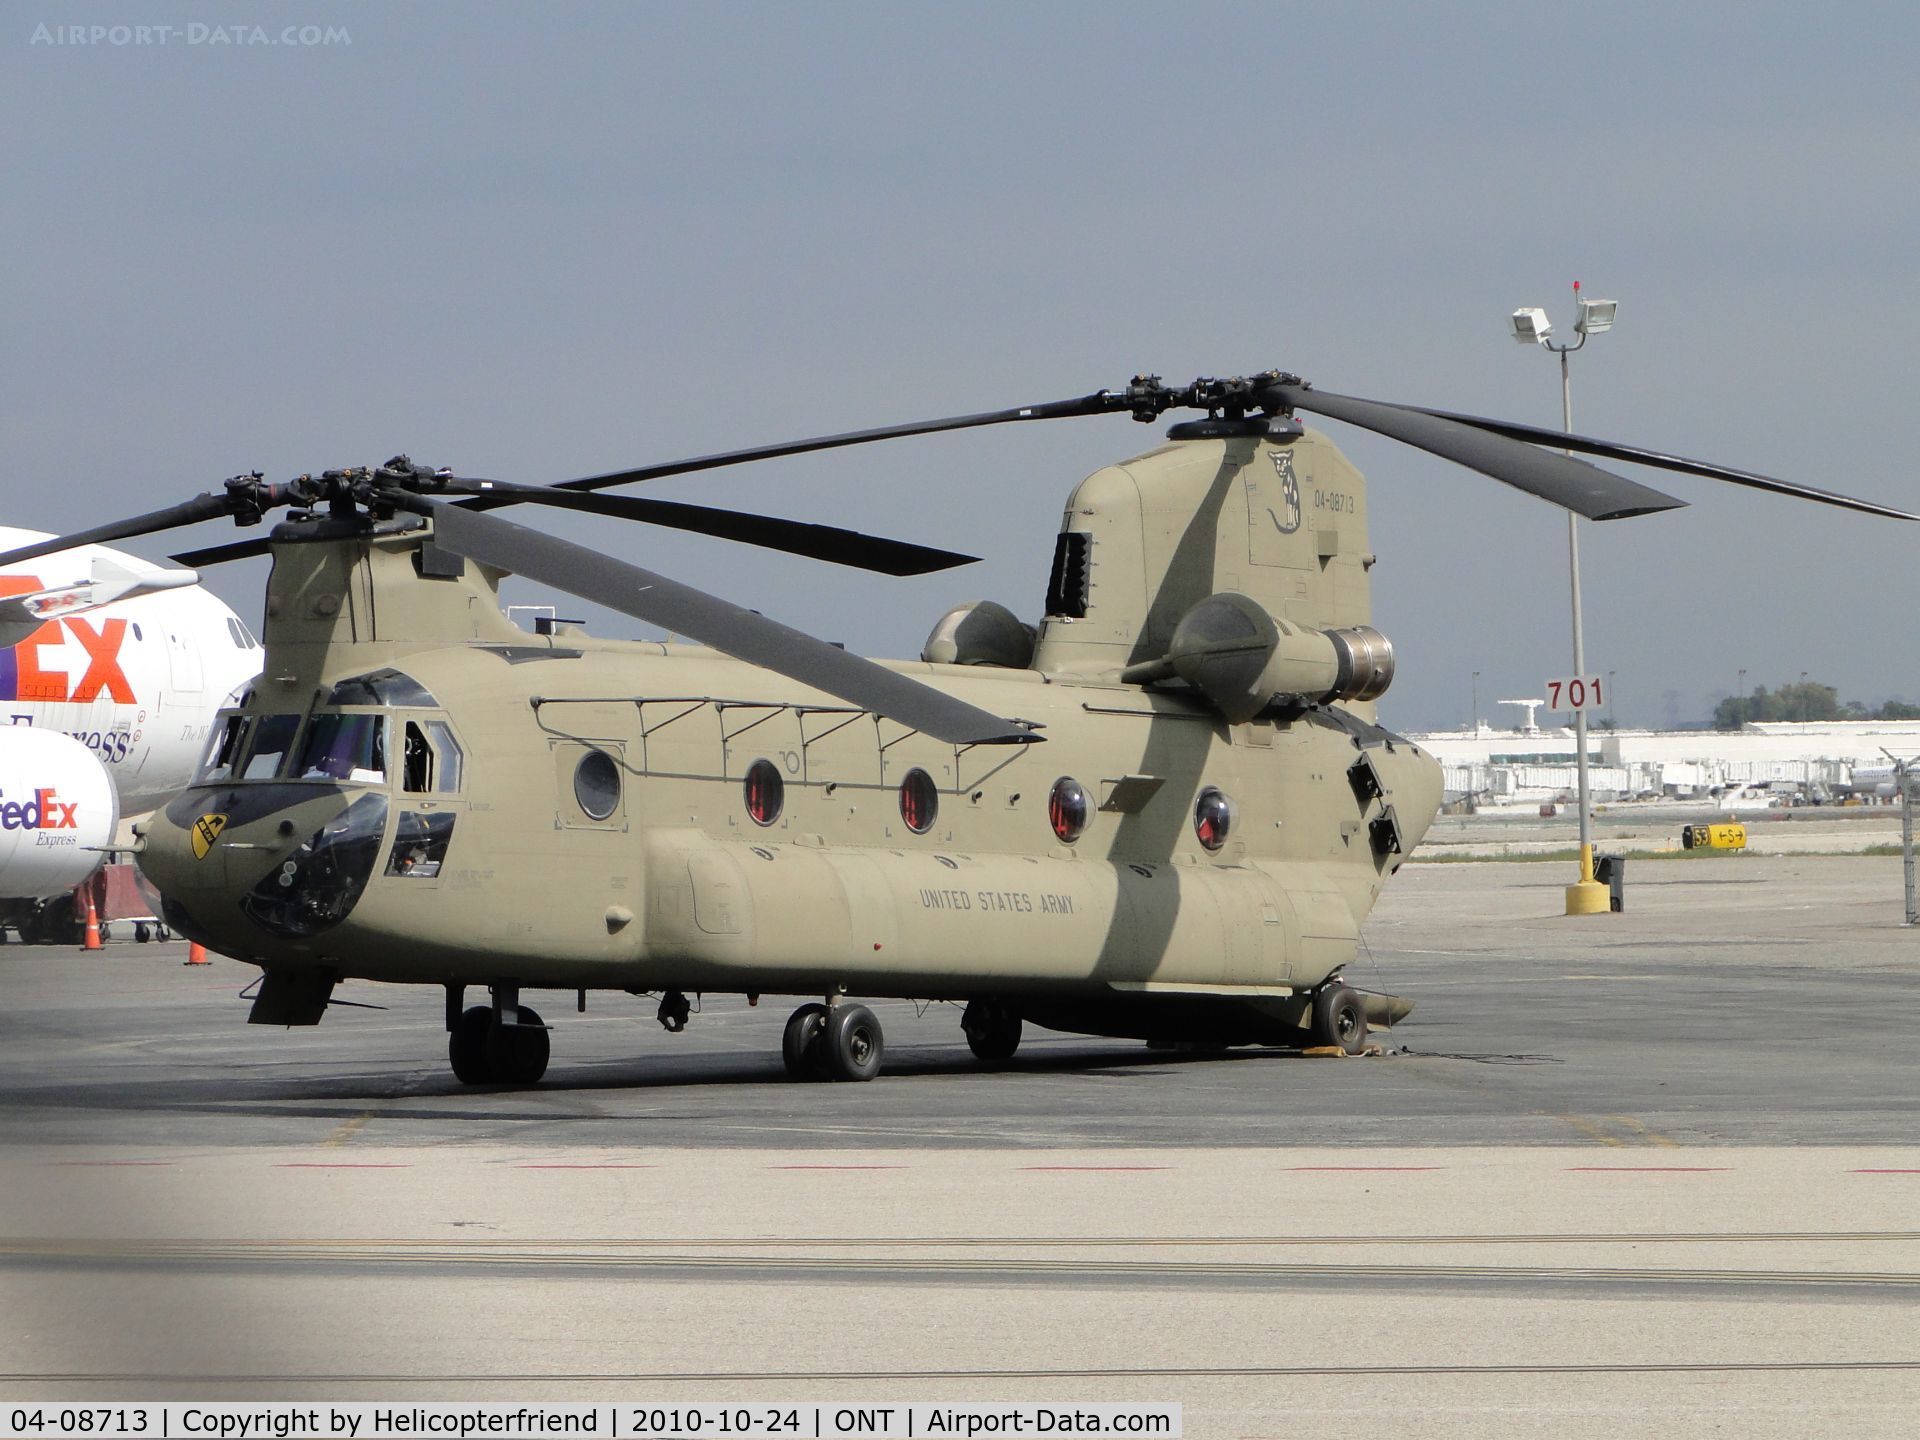 04-08713, 2004 Boeing CH-47F Chinook C/N M.8713, Parked at Guardian Air parking area.